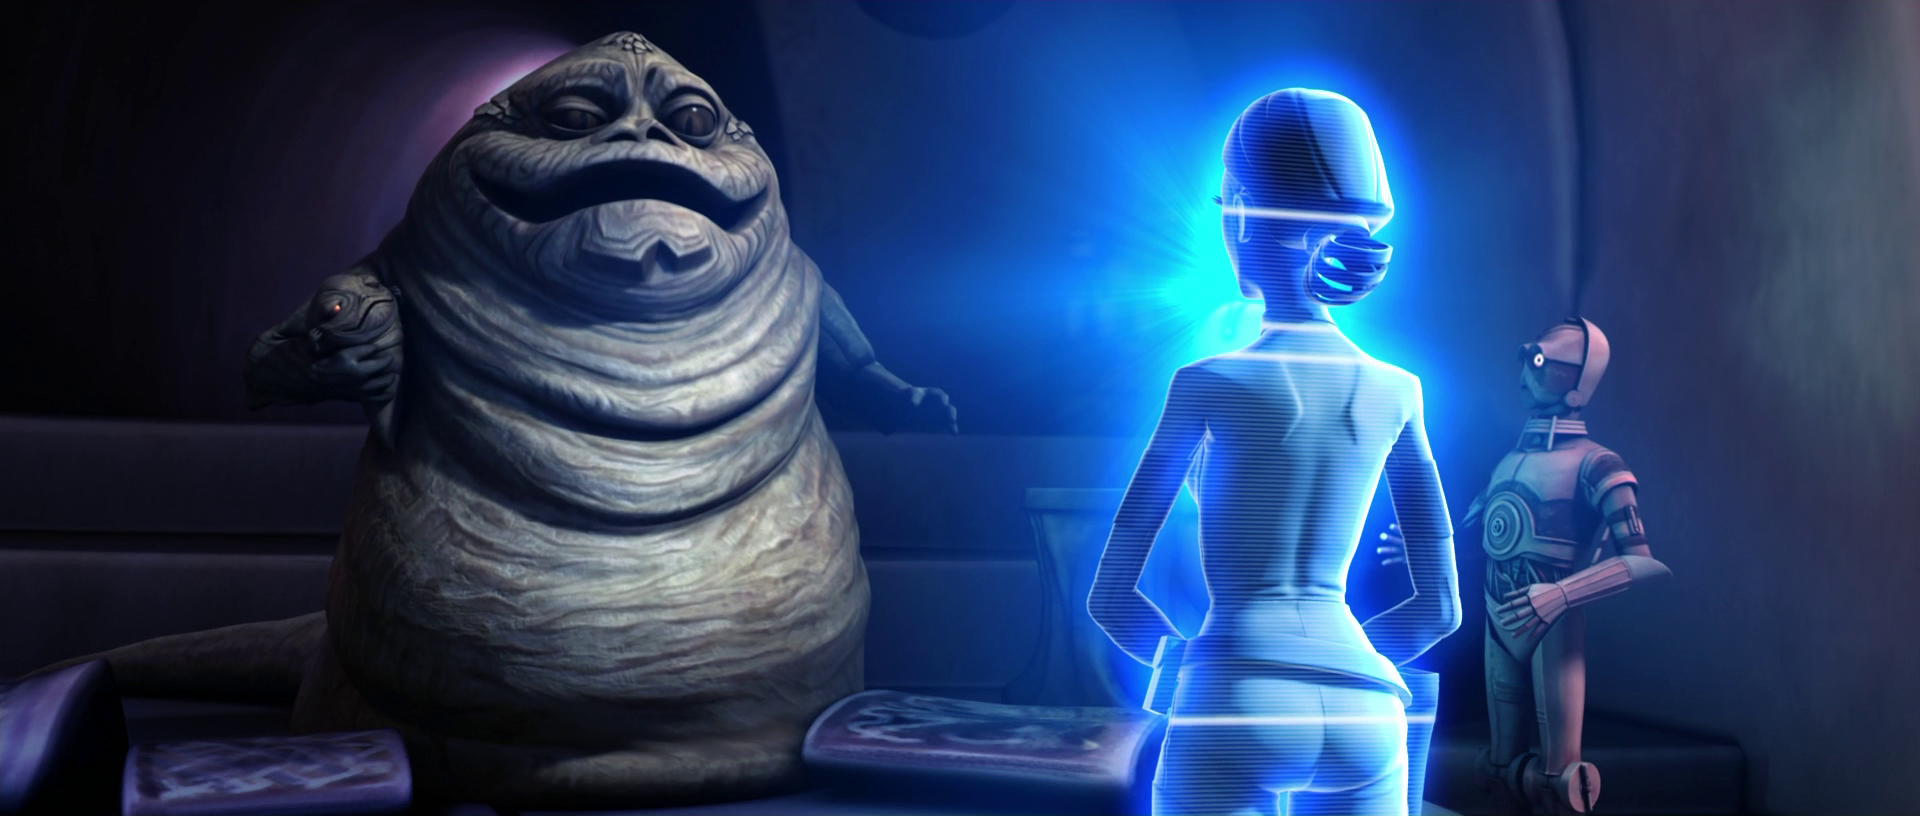 Leia And Jabba Fanfiction